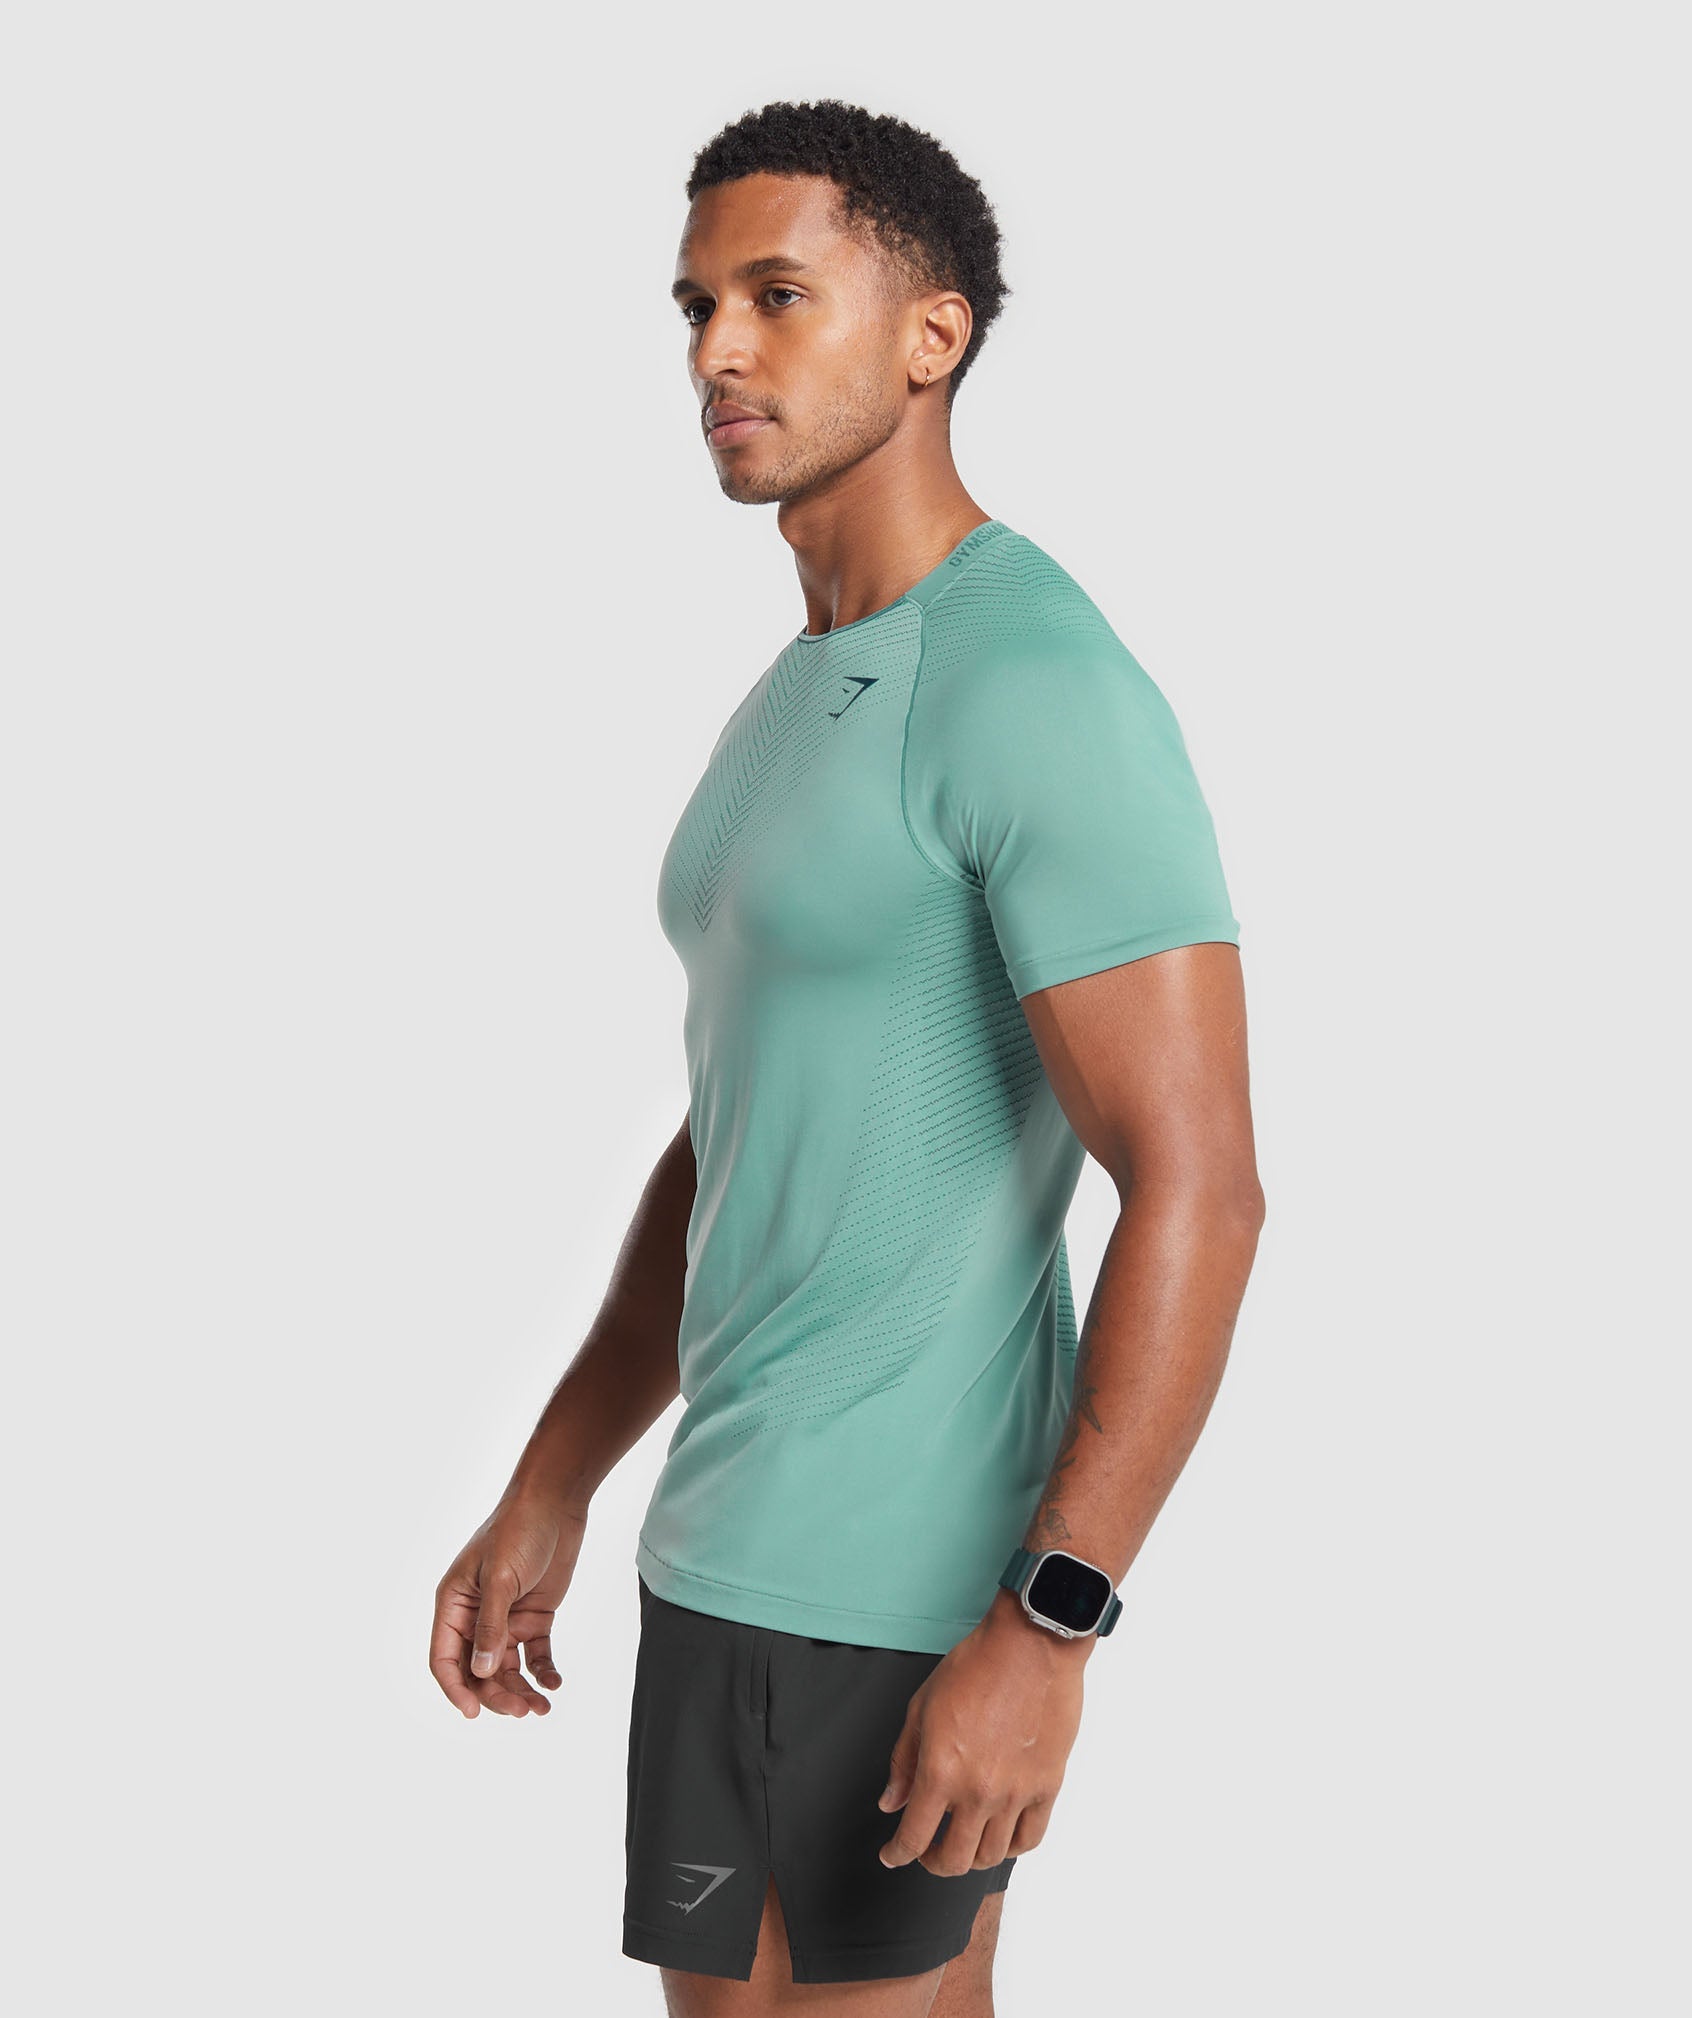 Apex Seamless T-Shirt in Duck Egg Blue/Smokey Teal - view 3